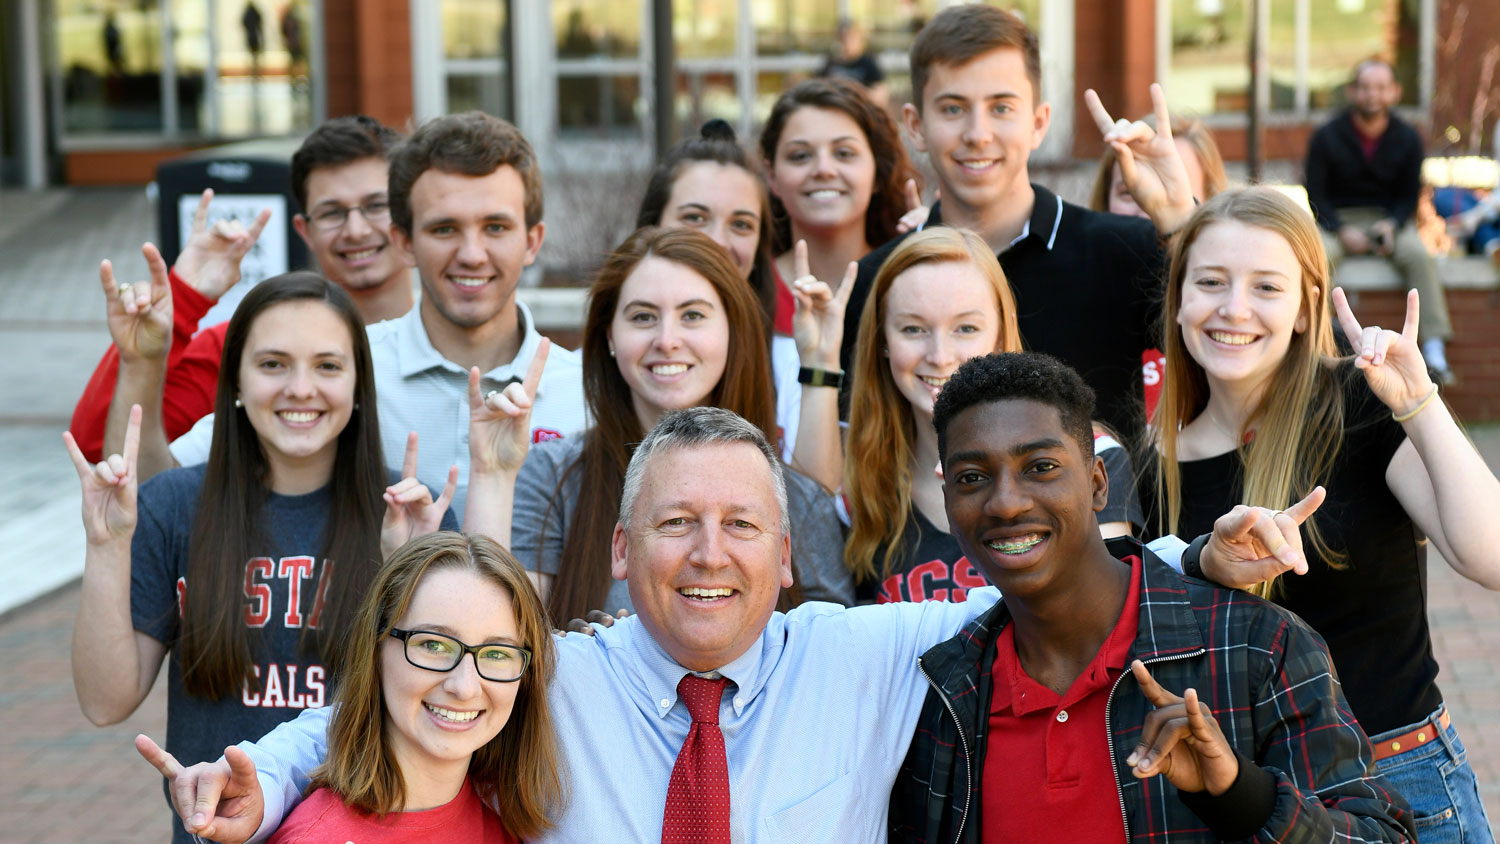 NC State CALS Dean Richard Linton with a group of students.